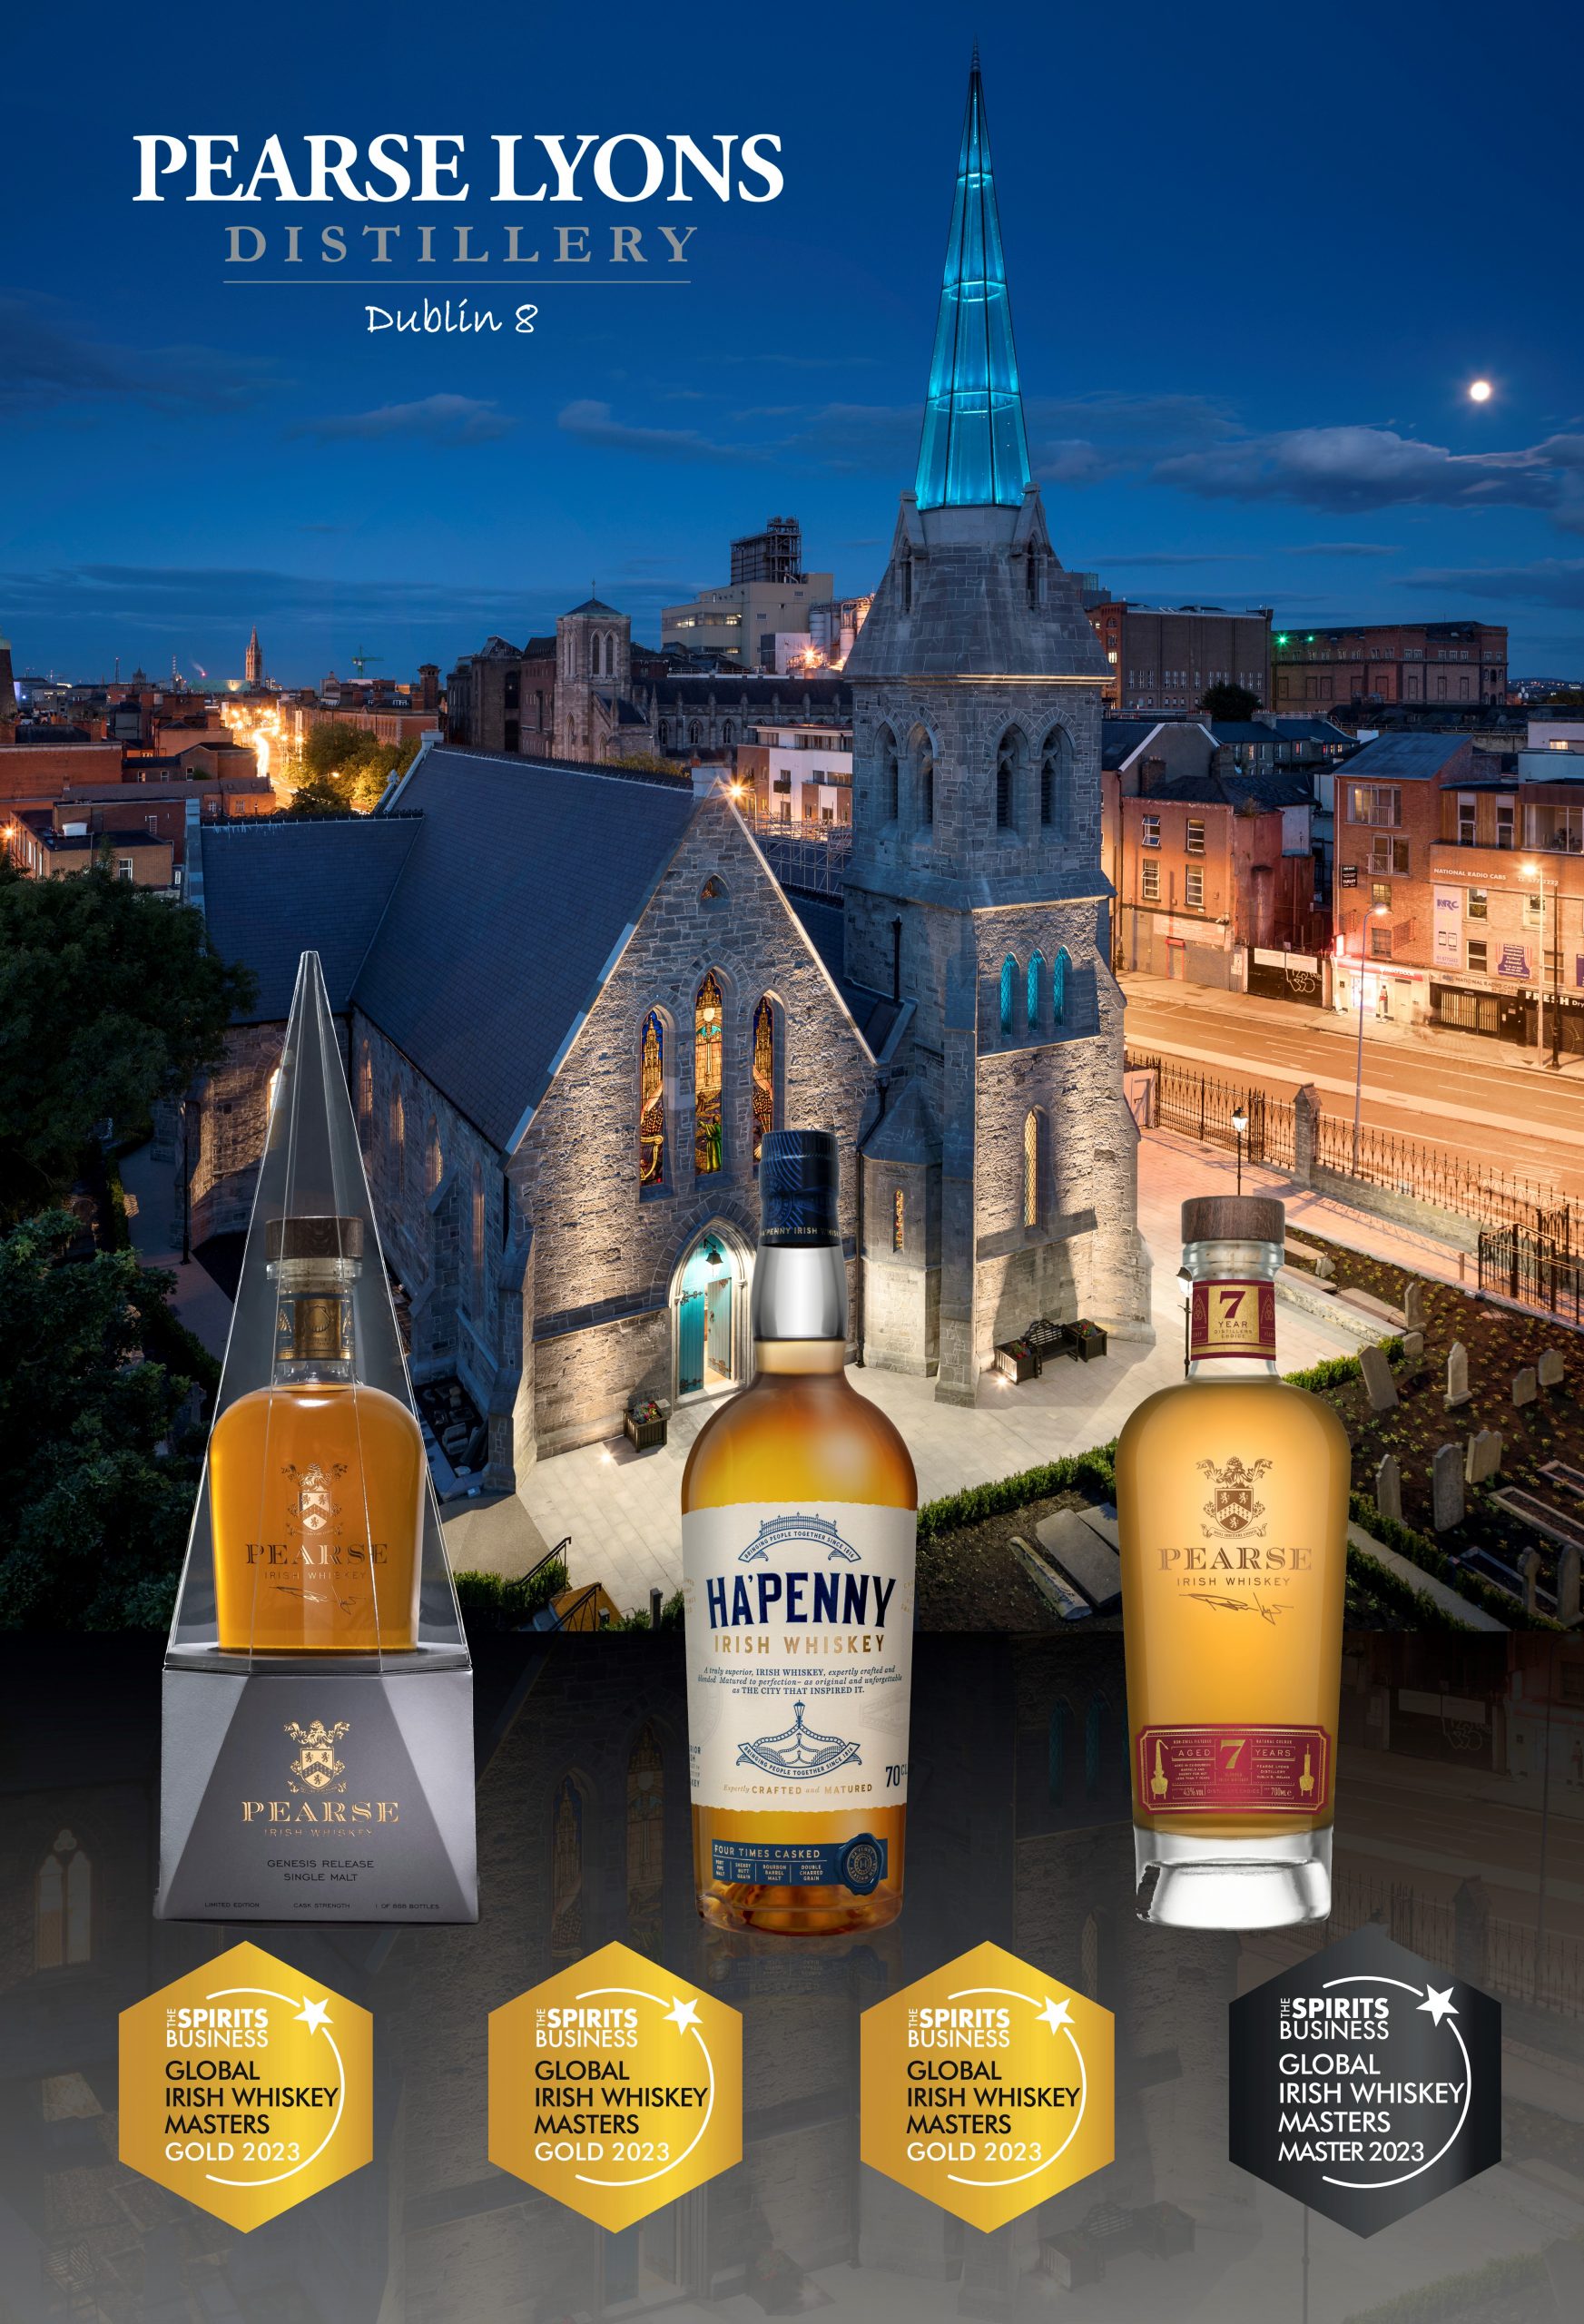 Pearse Lyons Distillery takes home four coveted awards at The Spirits Business Irish Whiskey Masters 2023